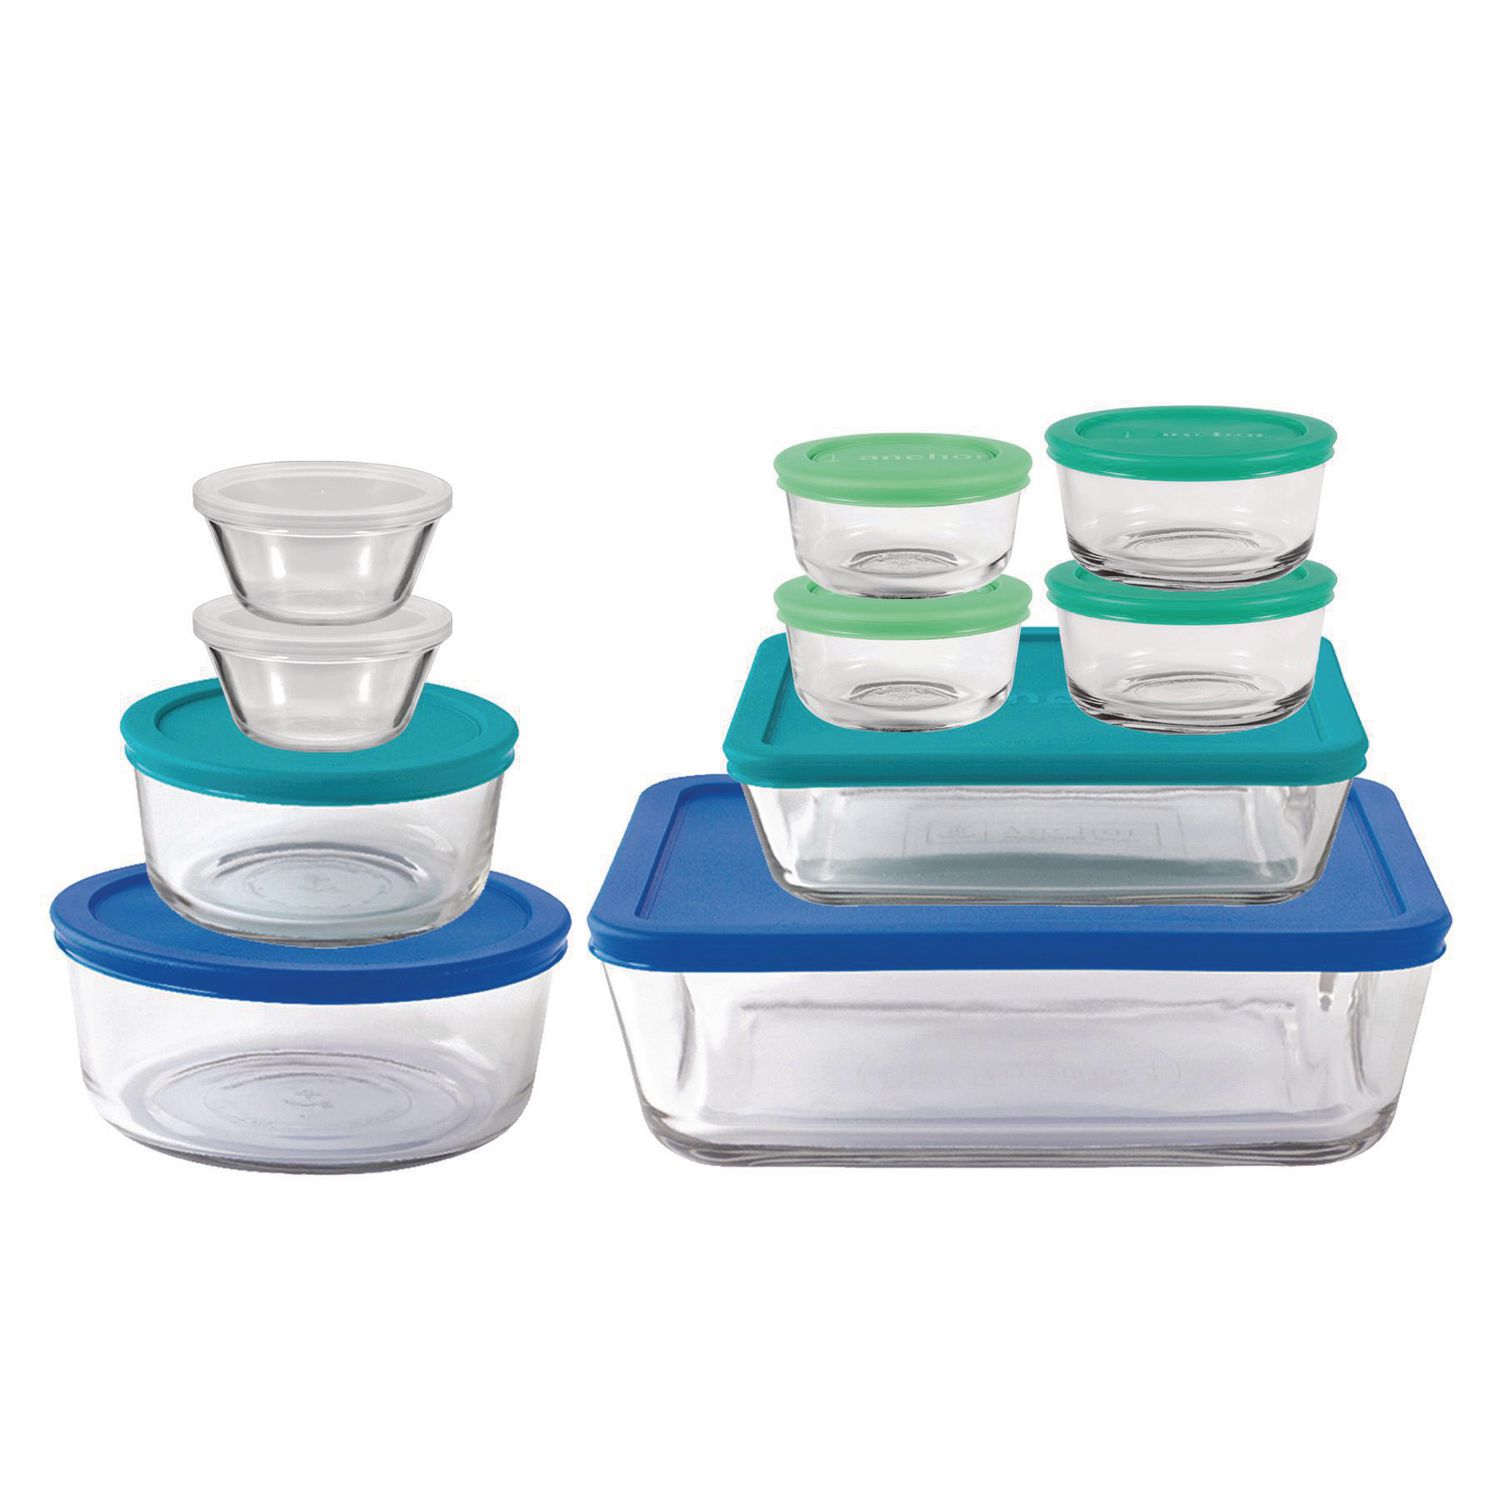 Anchor Hocking 11046AHG17 20-Piece Storage Set with Mixed Blue Lids 